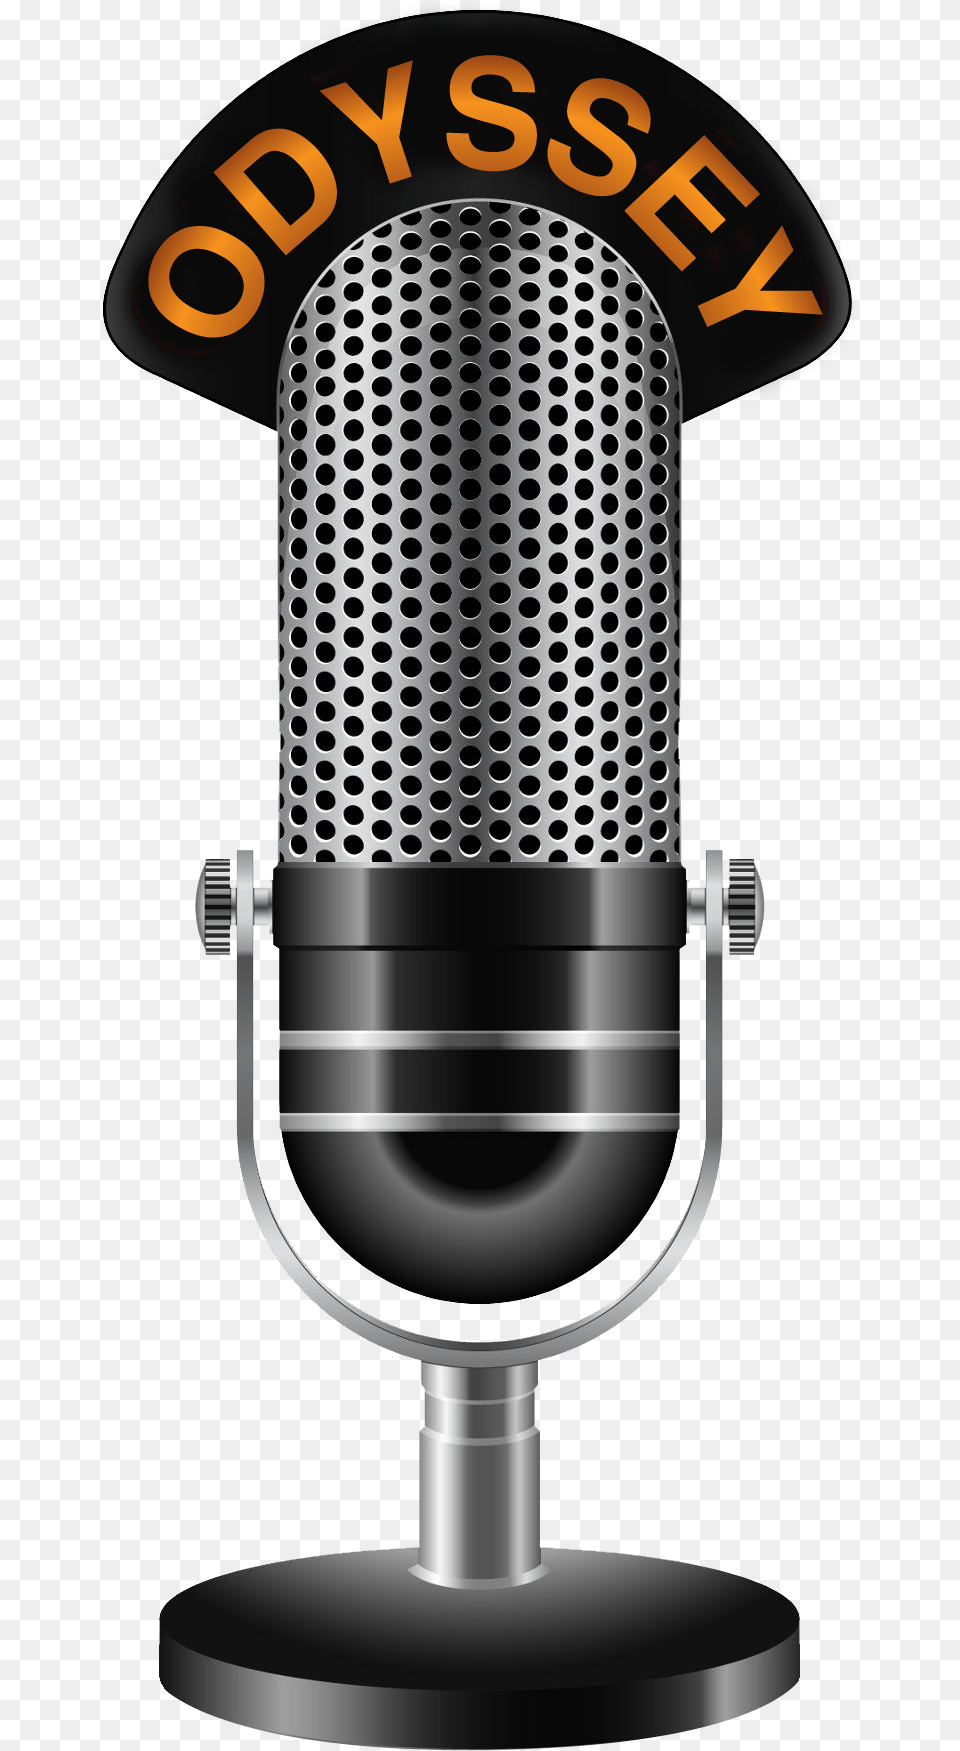 Microphone Background Transparent Radio Microphone Transparent Background, Electrical Device, Smoke Pipe Png Image